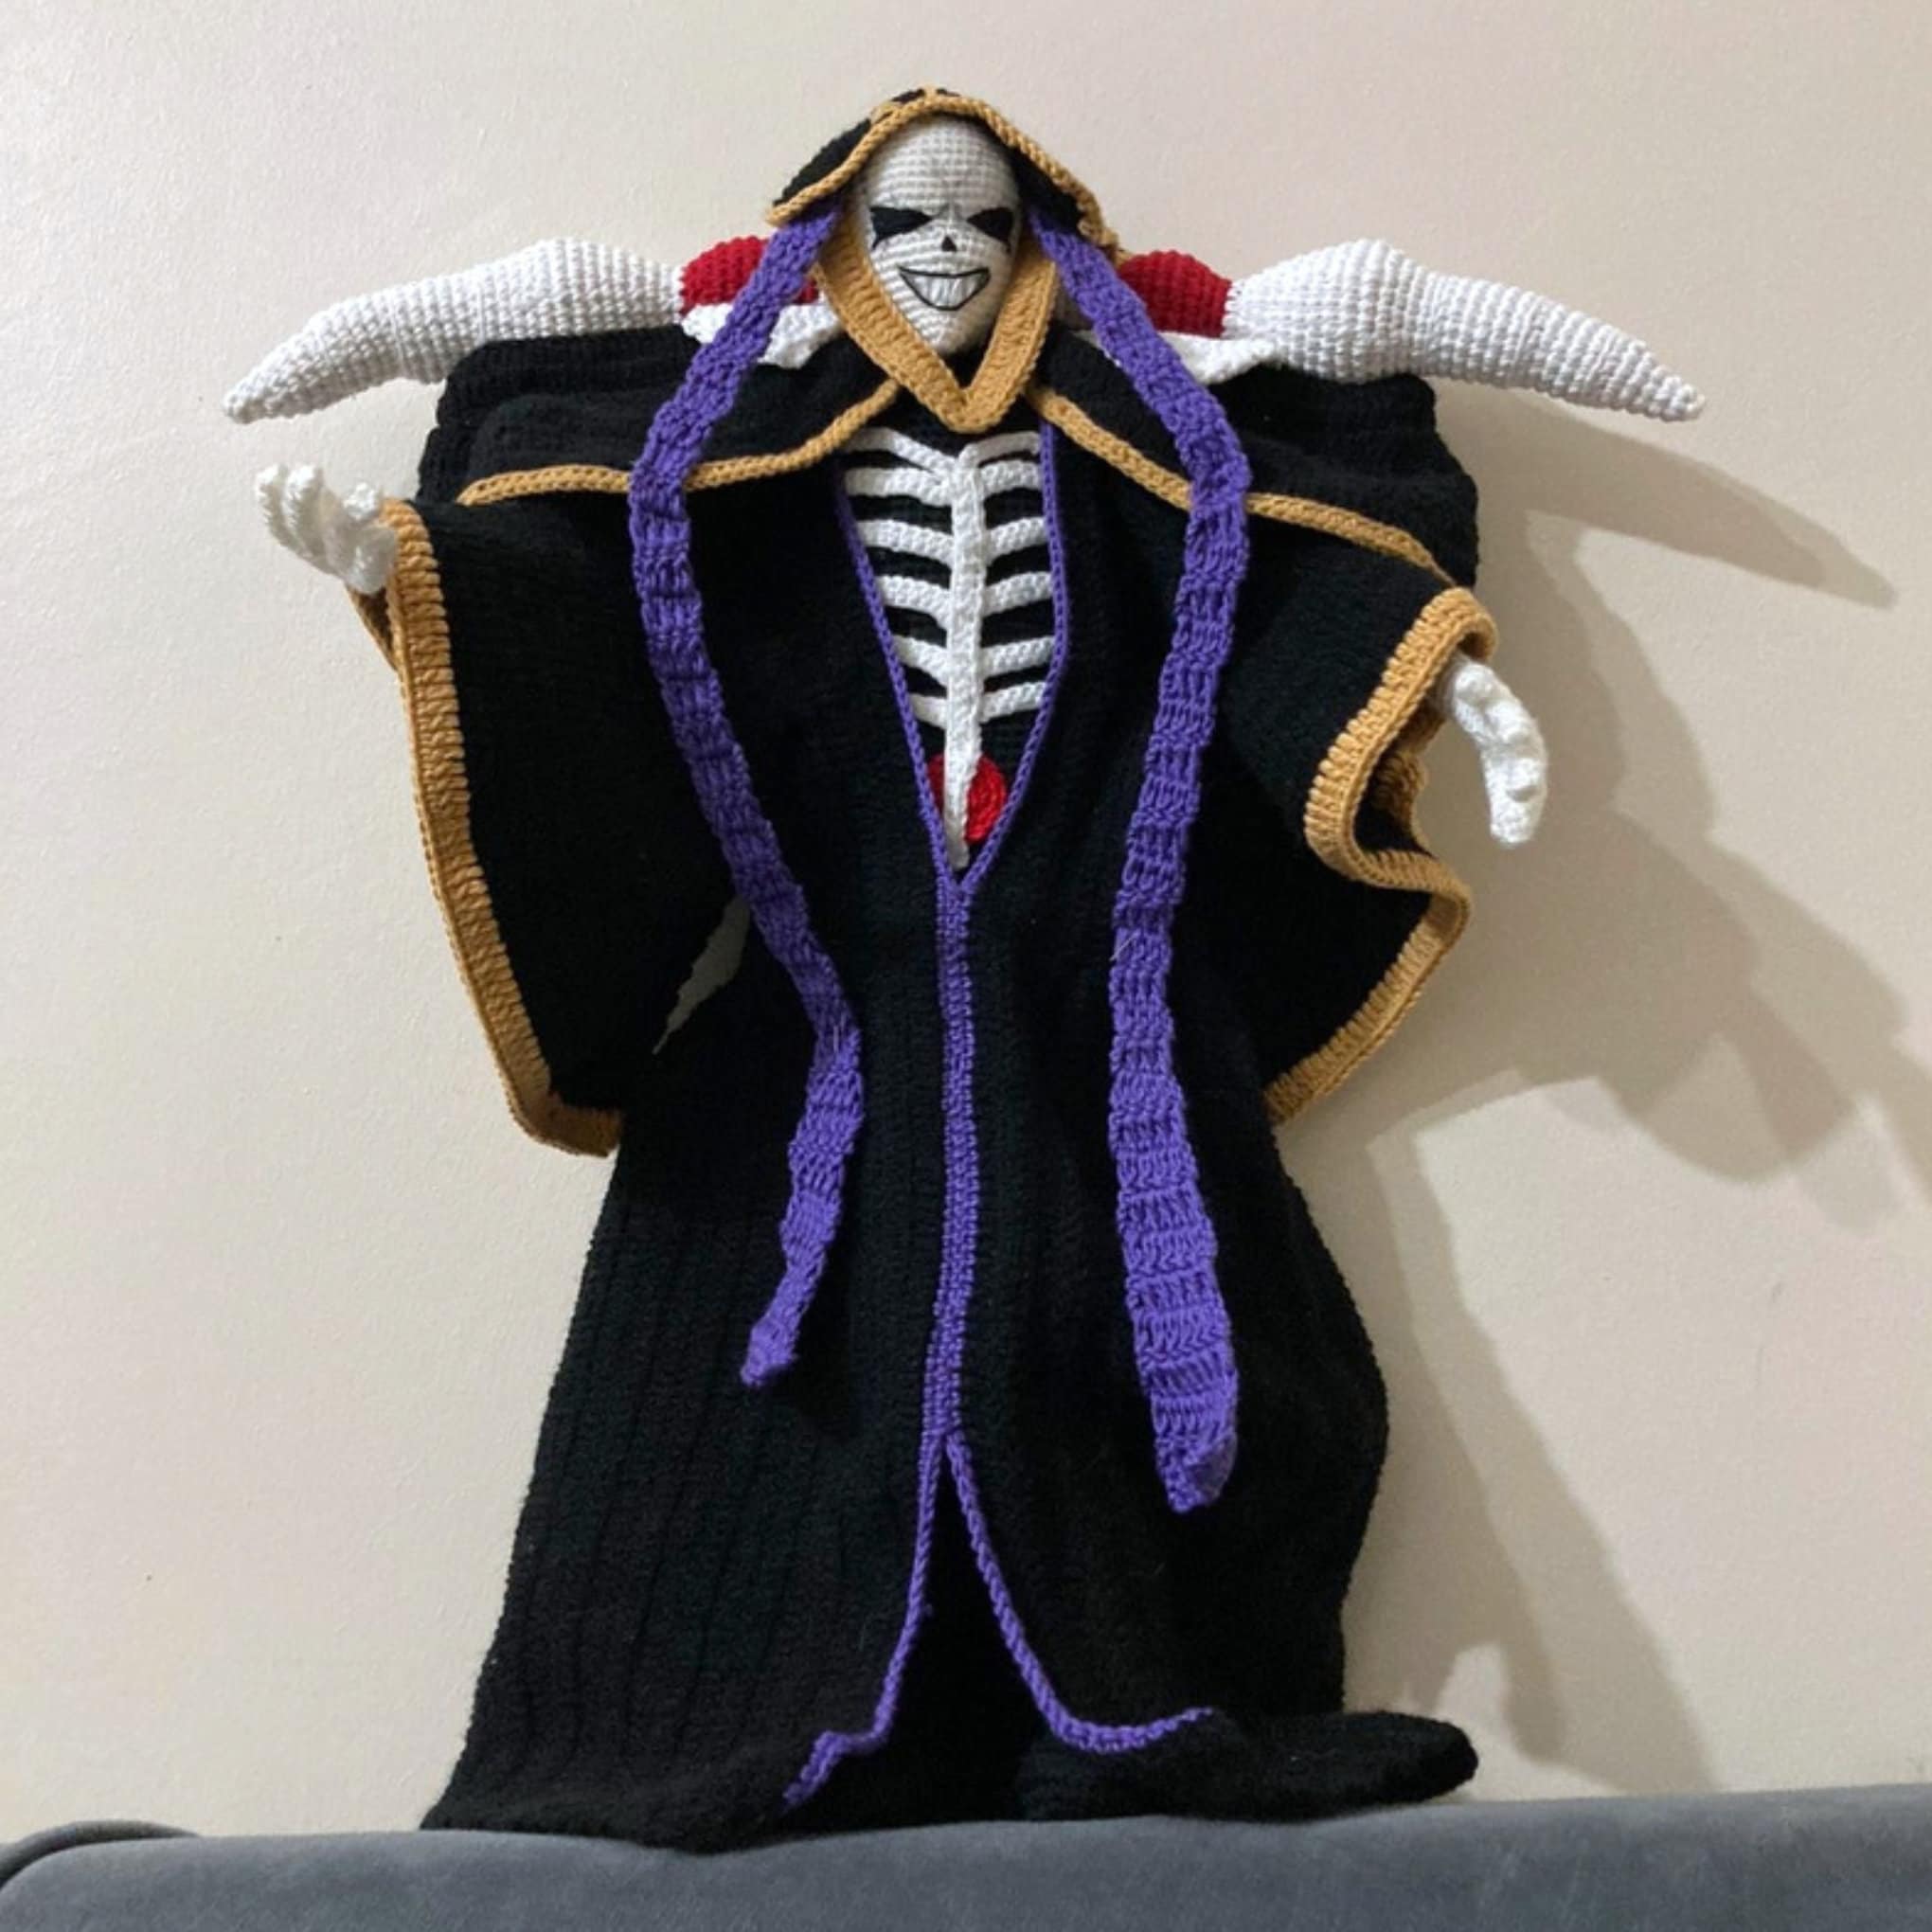 thought you guys would like Ainz Ooal Gown Figure from F:NEX : r/overlord